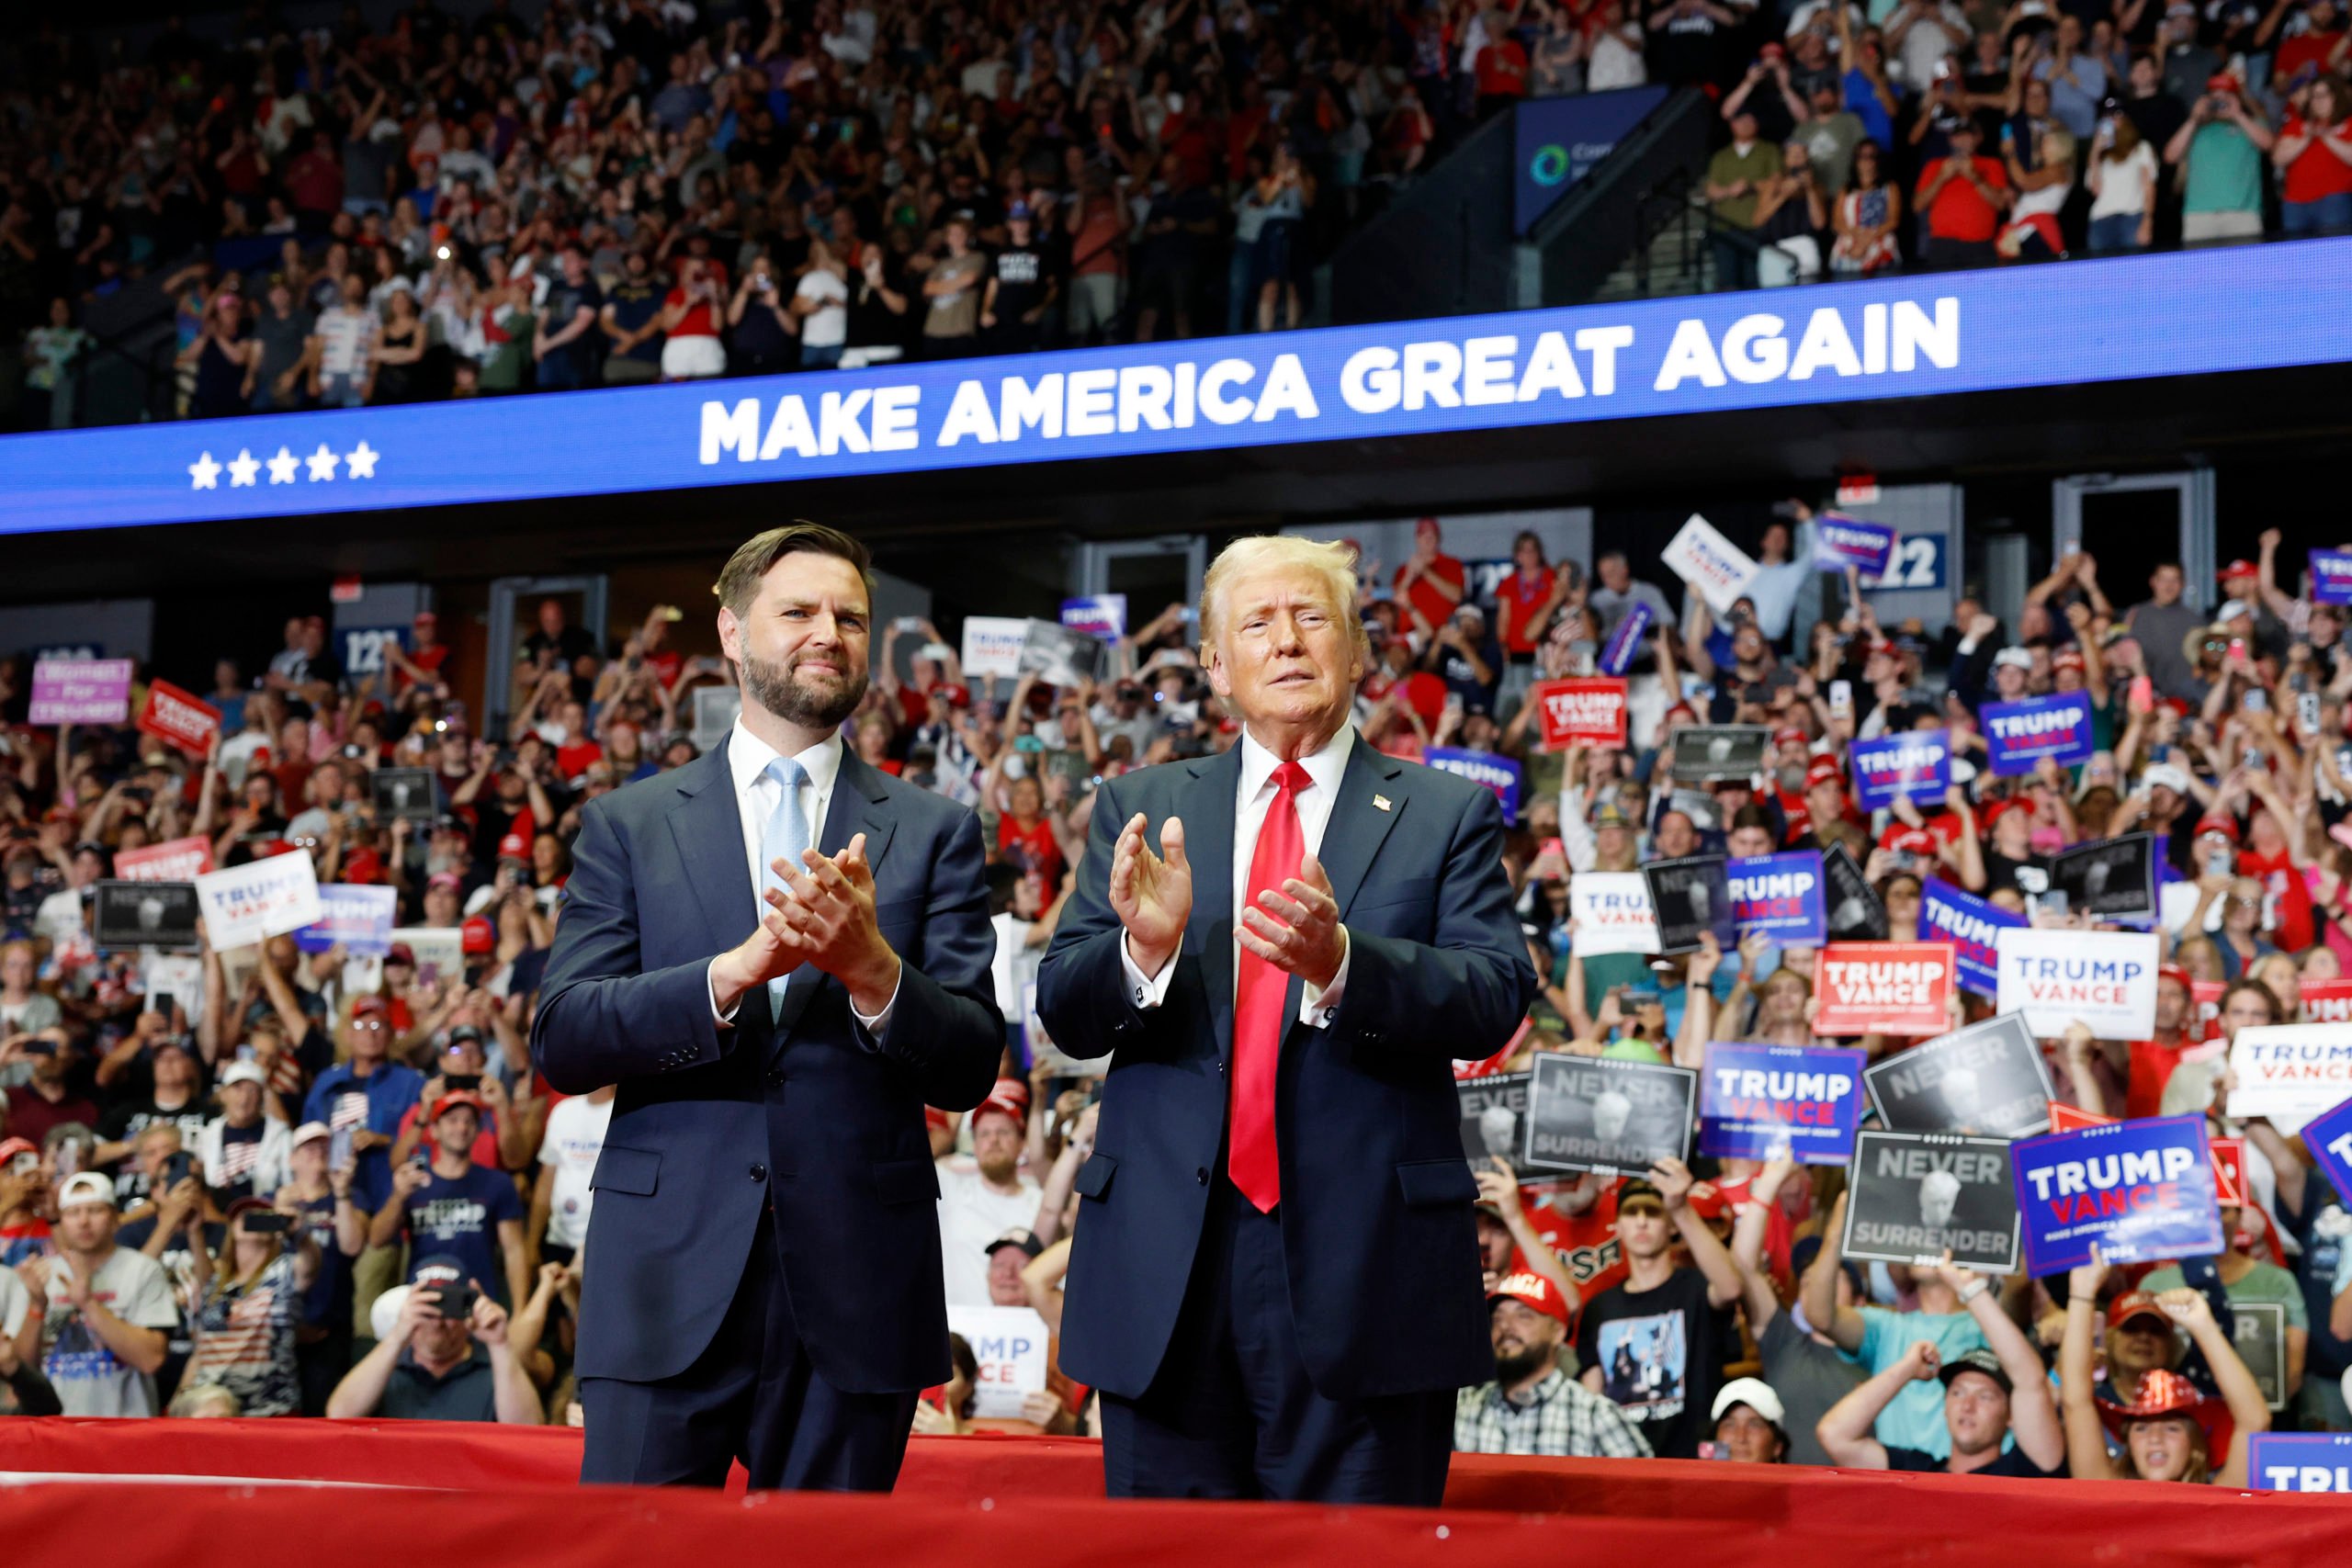 Republican presidential nominee, former U.S. President Donald Trump stands onstage with Republican vice presidential candidate, Sen. J.D. Vance (R-OH) during a campaign rally. (Photo by Anna Moneymaker/Getty Images)